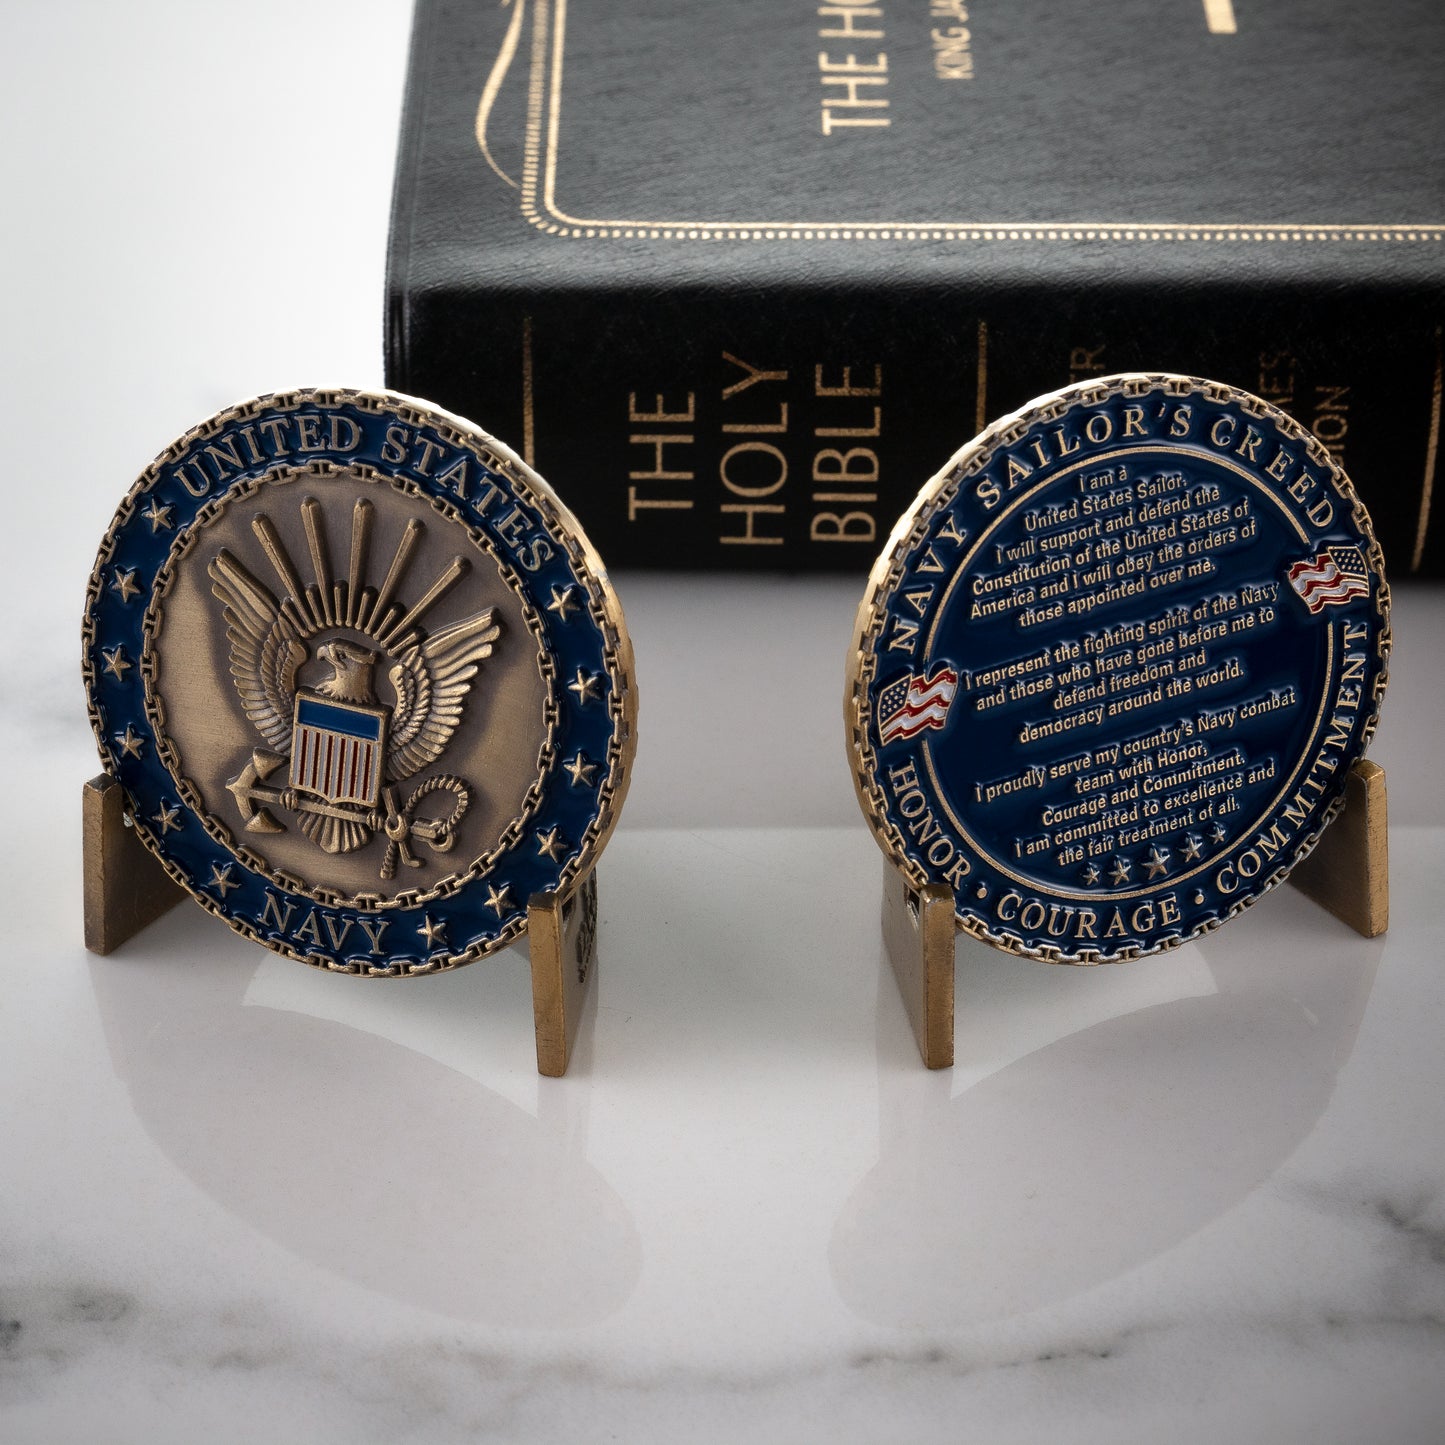 US Navy Sailor’s Creed Coin